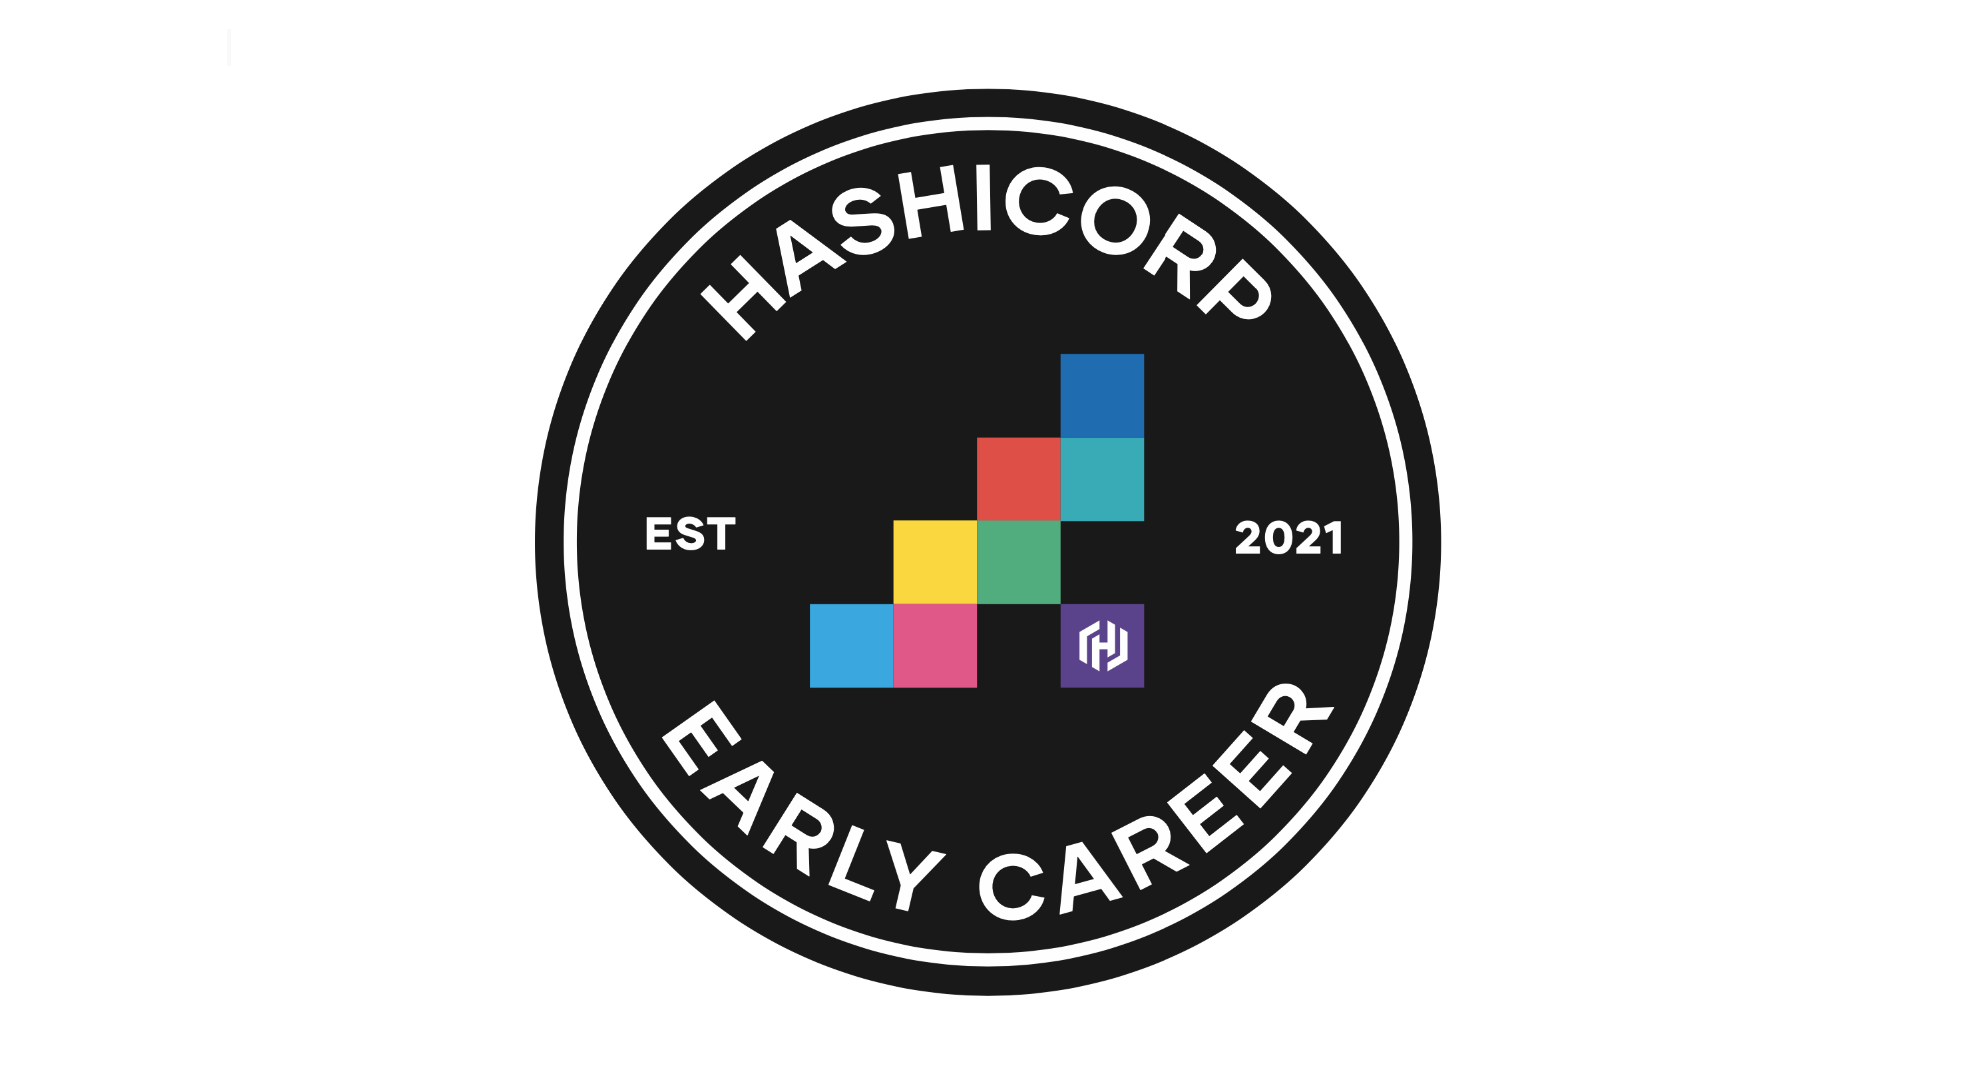 Meet Some of HashiCorp’s Talented 2022 Interns